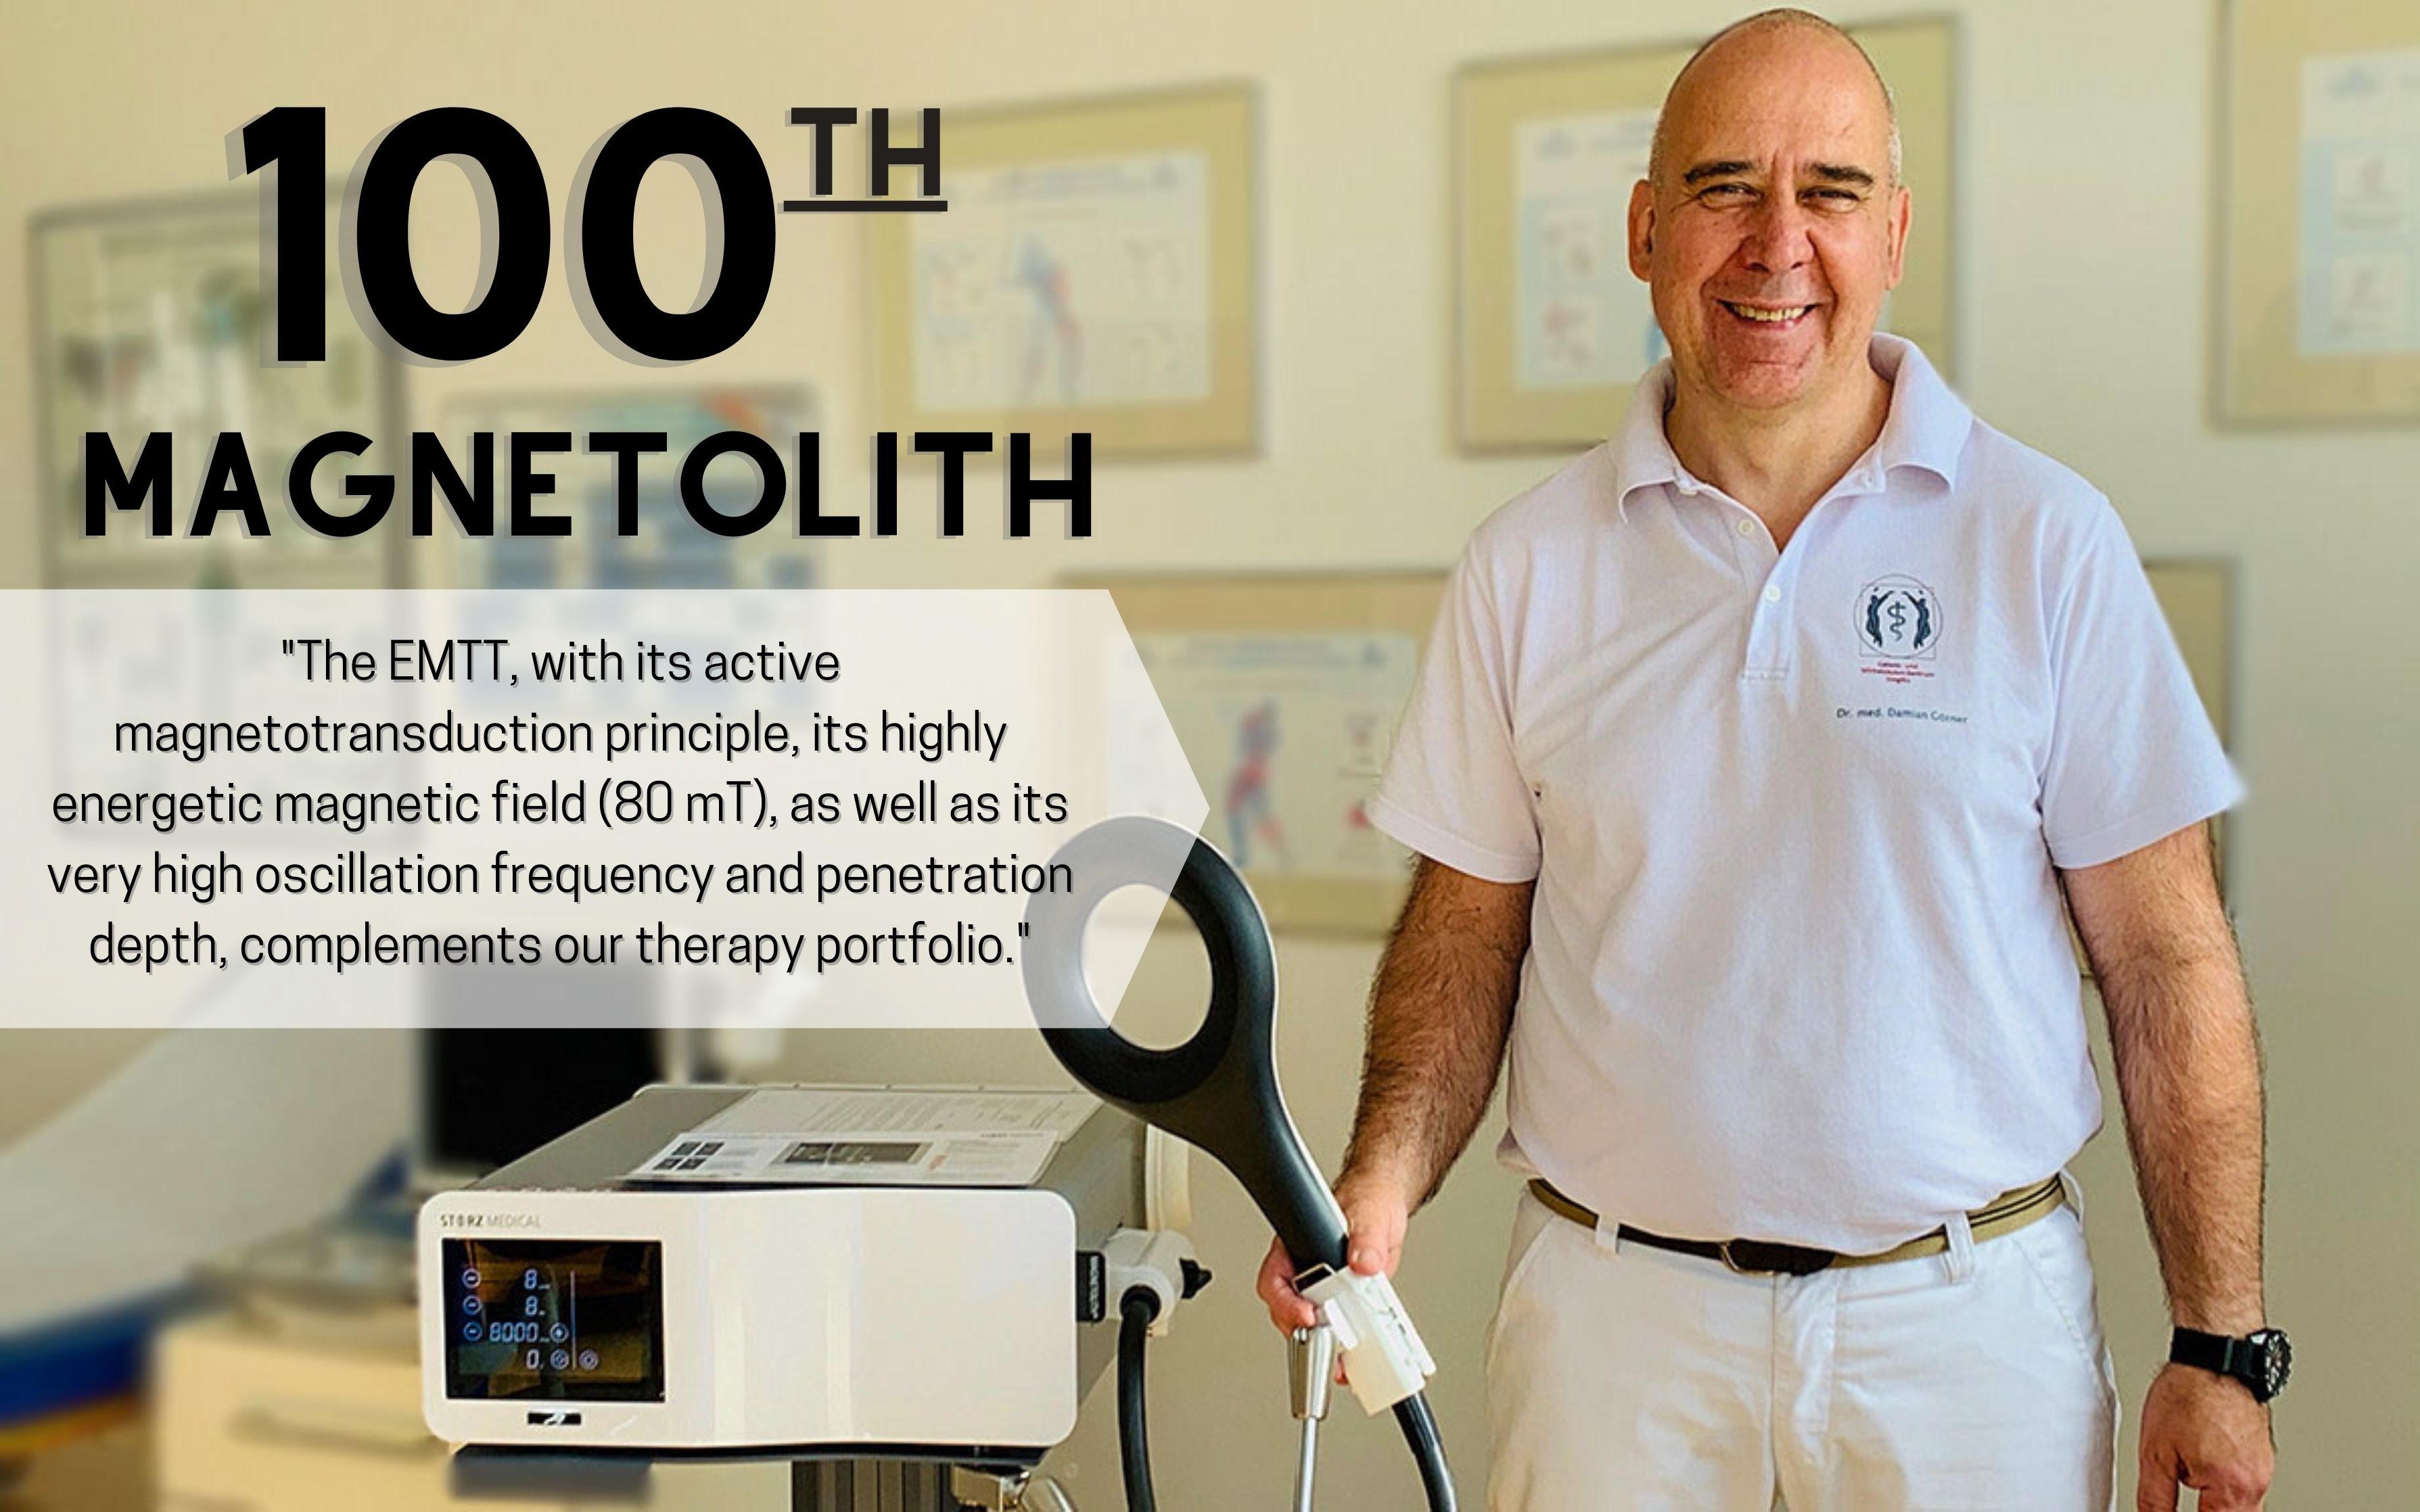 STORZ MEDICAL: 100 MAGNETOLITH IN 7 MONTHS!